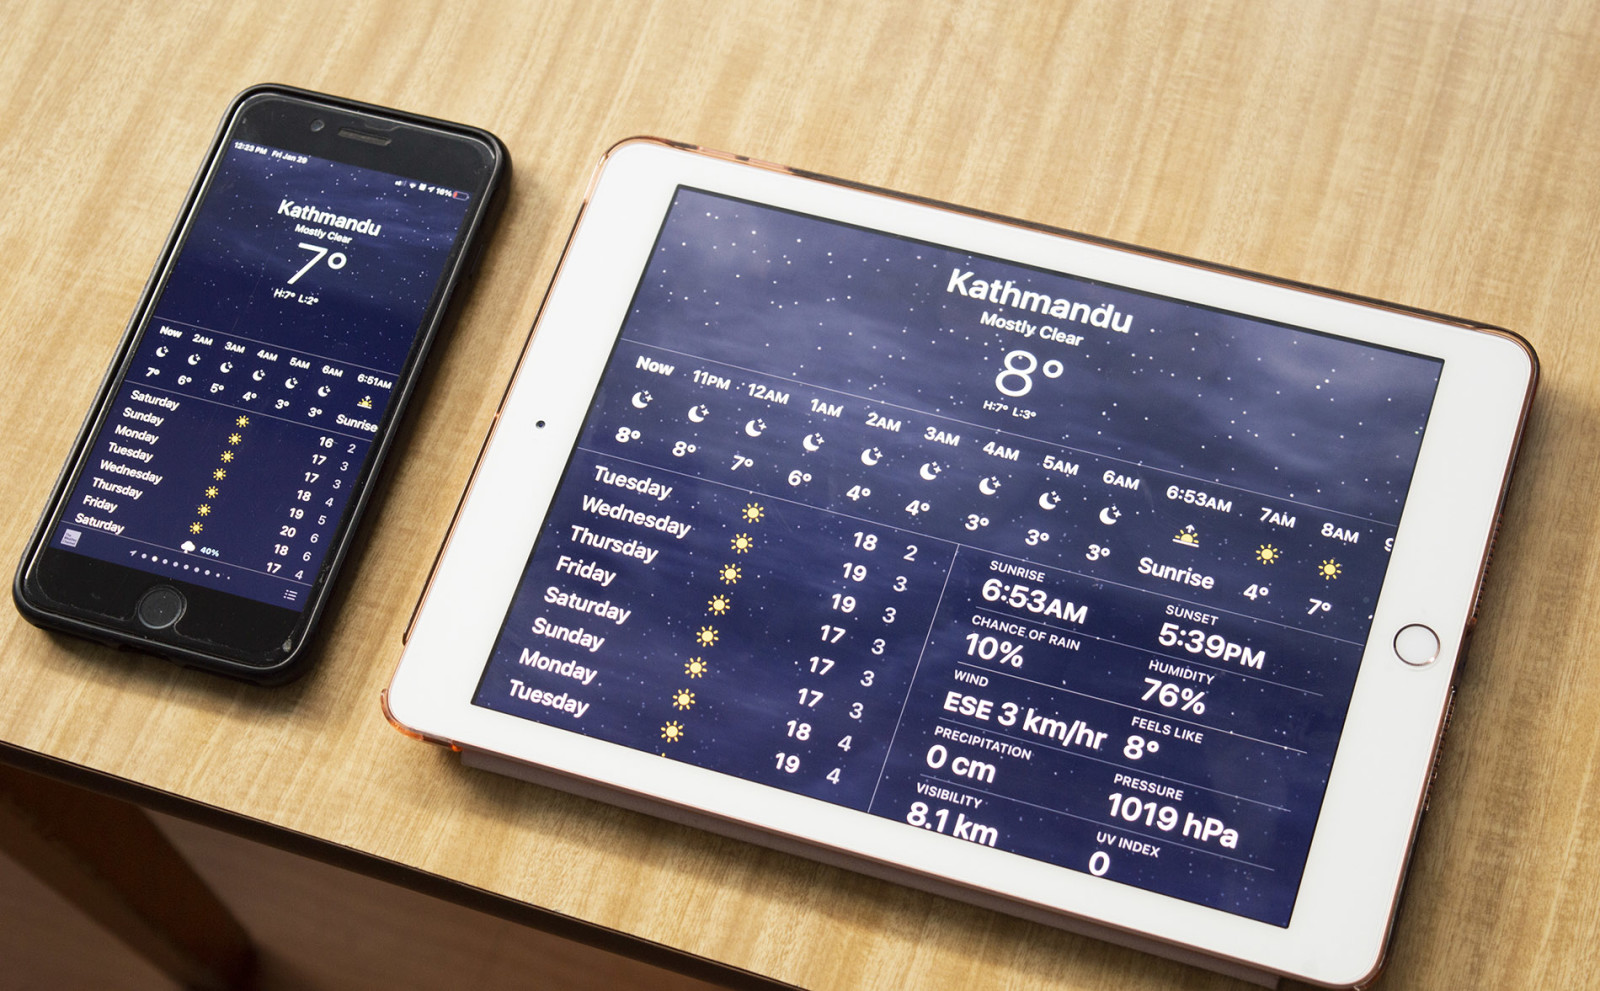 ©_Nimesh_Devkota_Comparing_the_iPad_Weather_Application_with_the_iPhone_7_Plus_Mockup_Designs_2021_All_Rights_Reserved_UX_UI_Portfolio3